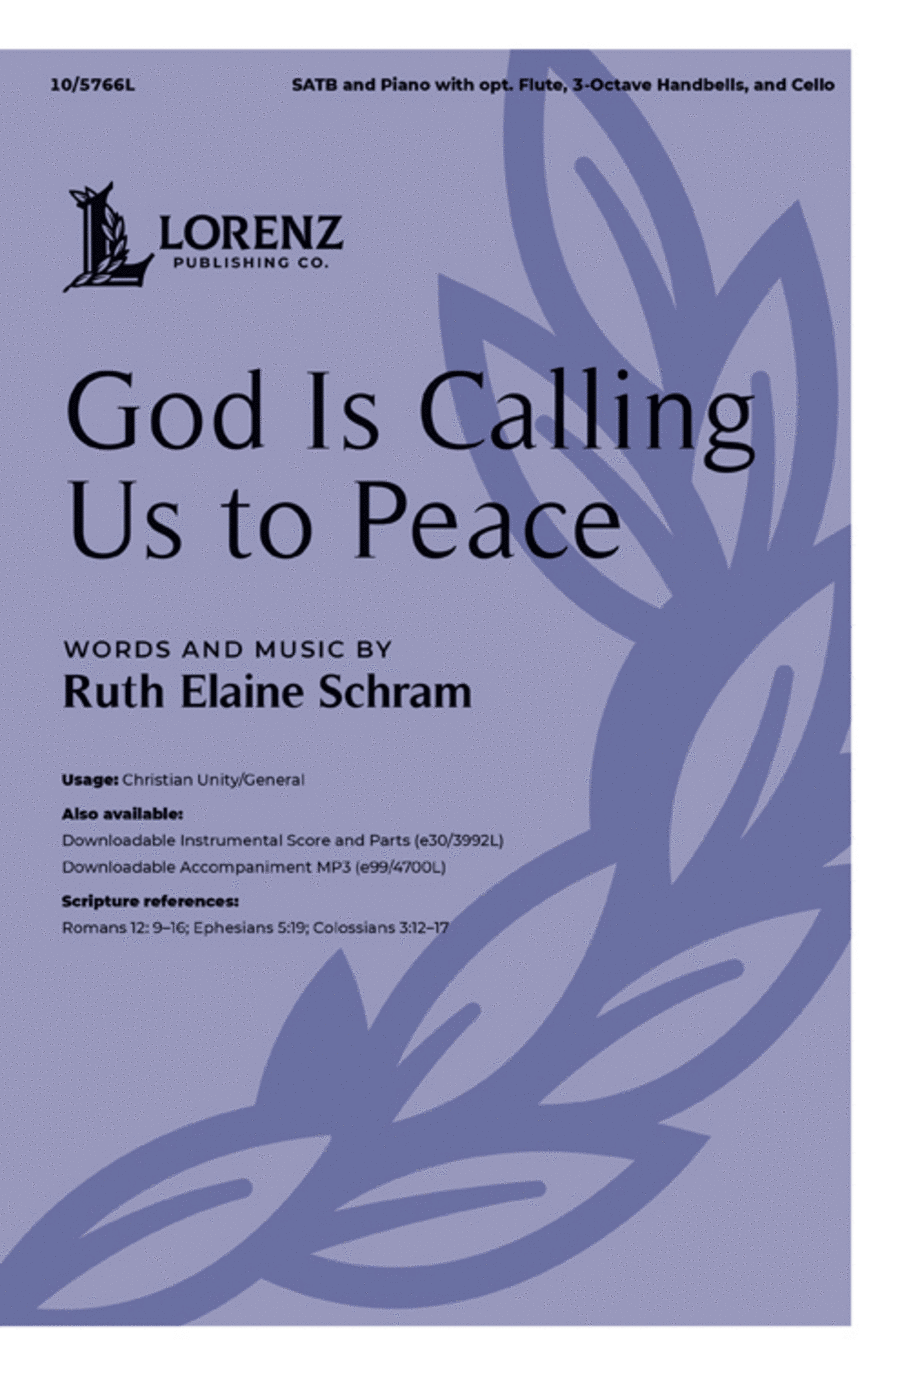 God Is Calling Us to Peace